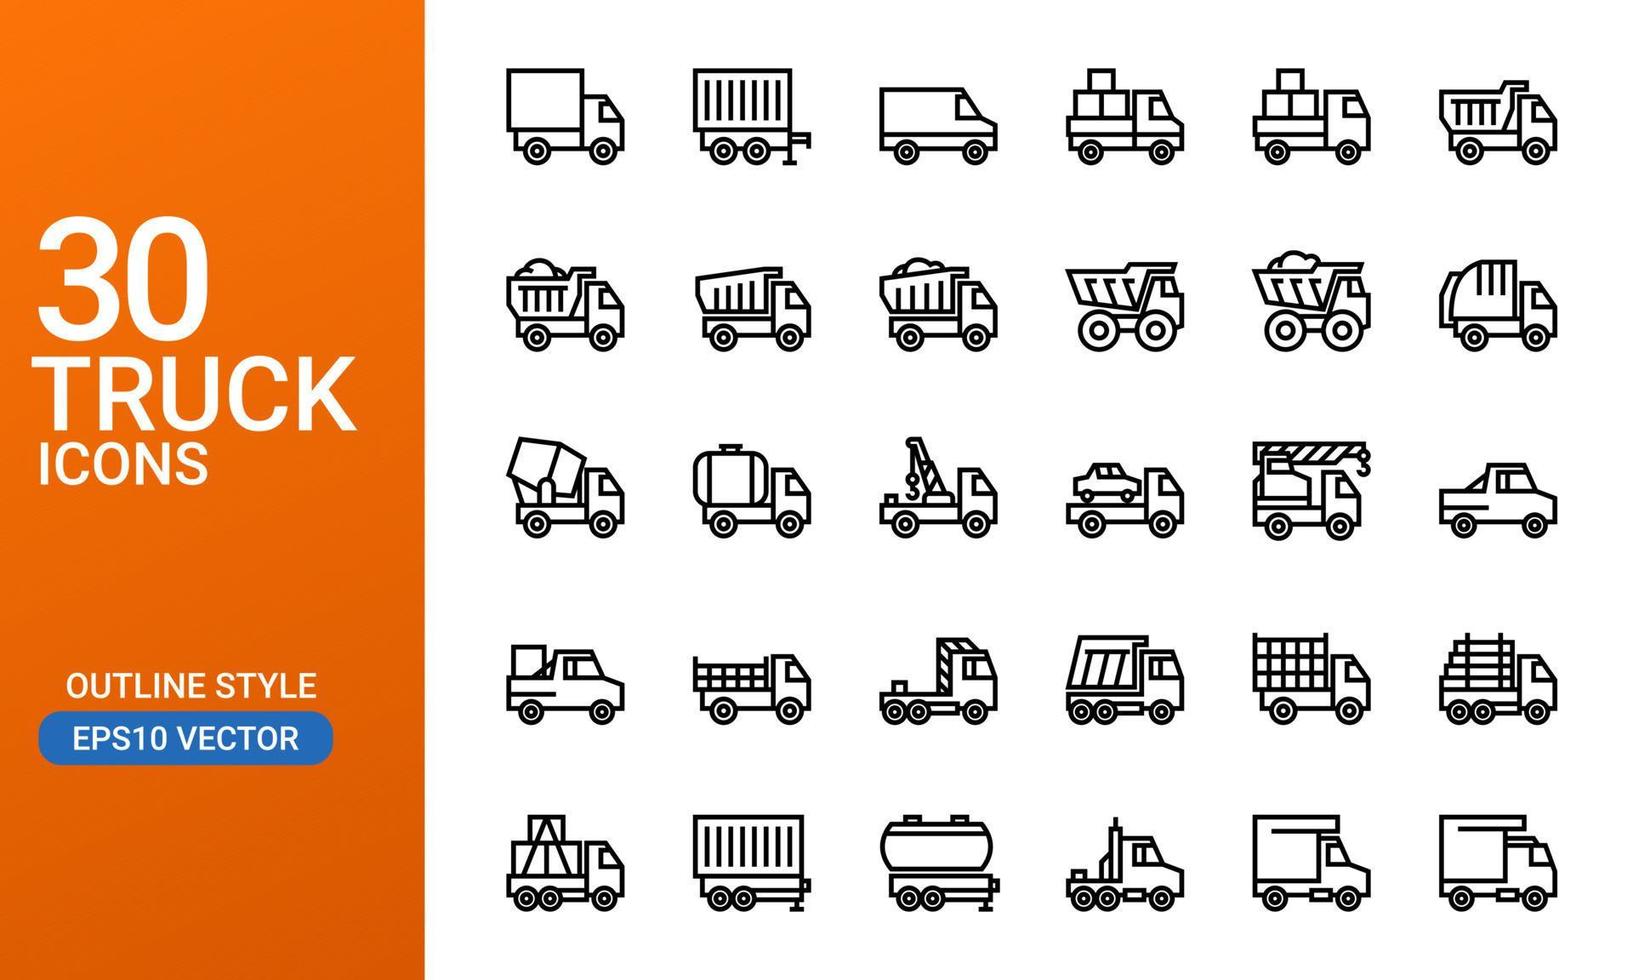 A collection of outlined icons from various types of trucks. Freight trucks and mining trucks icon set. Suitable for design elements of transportation services, cargo delivery, and mining. vector